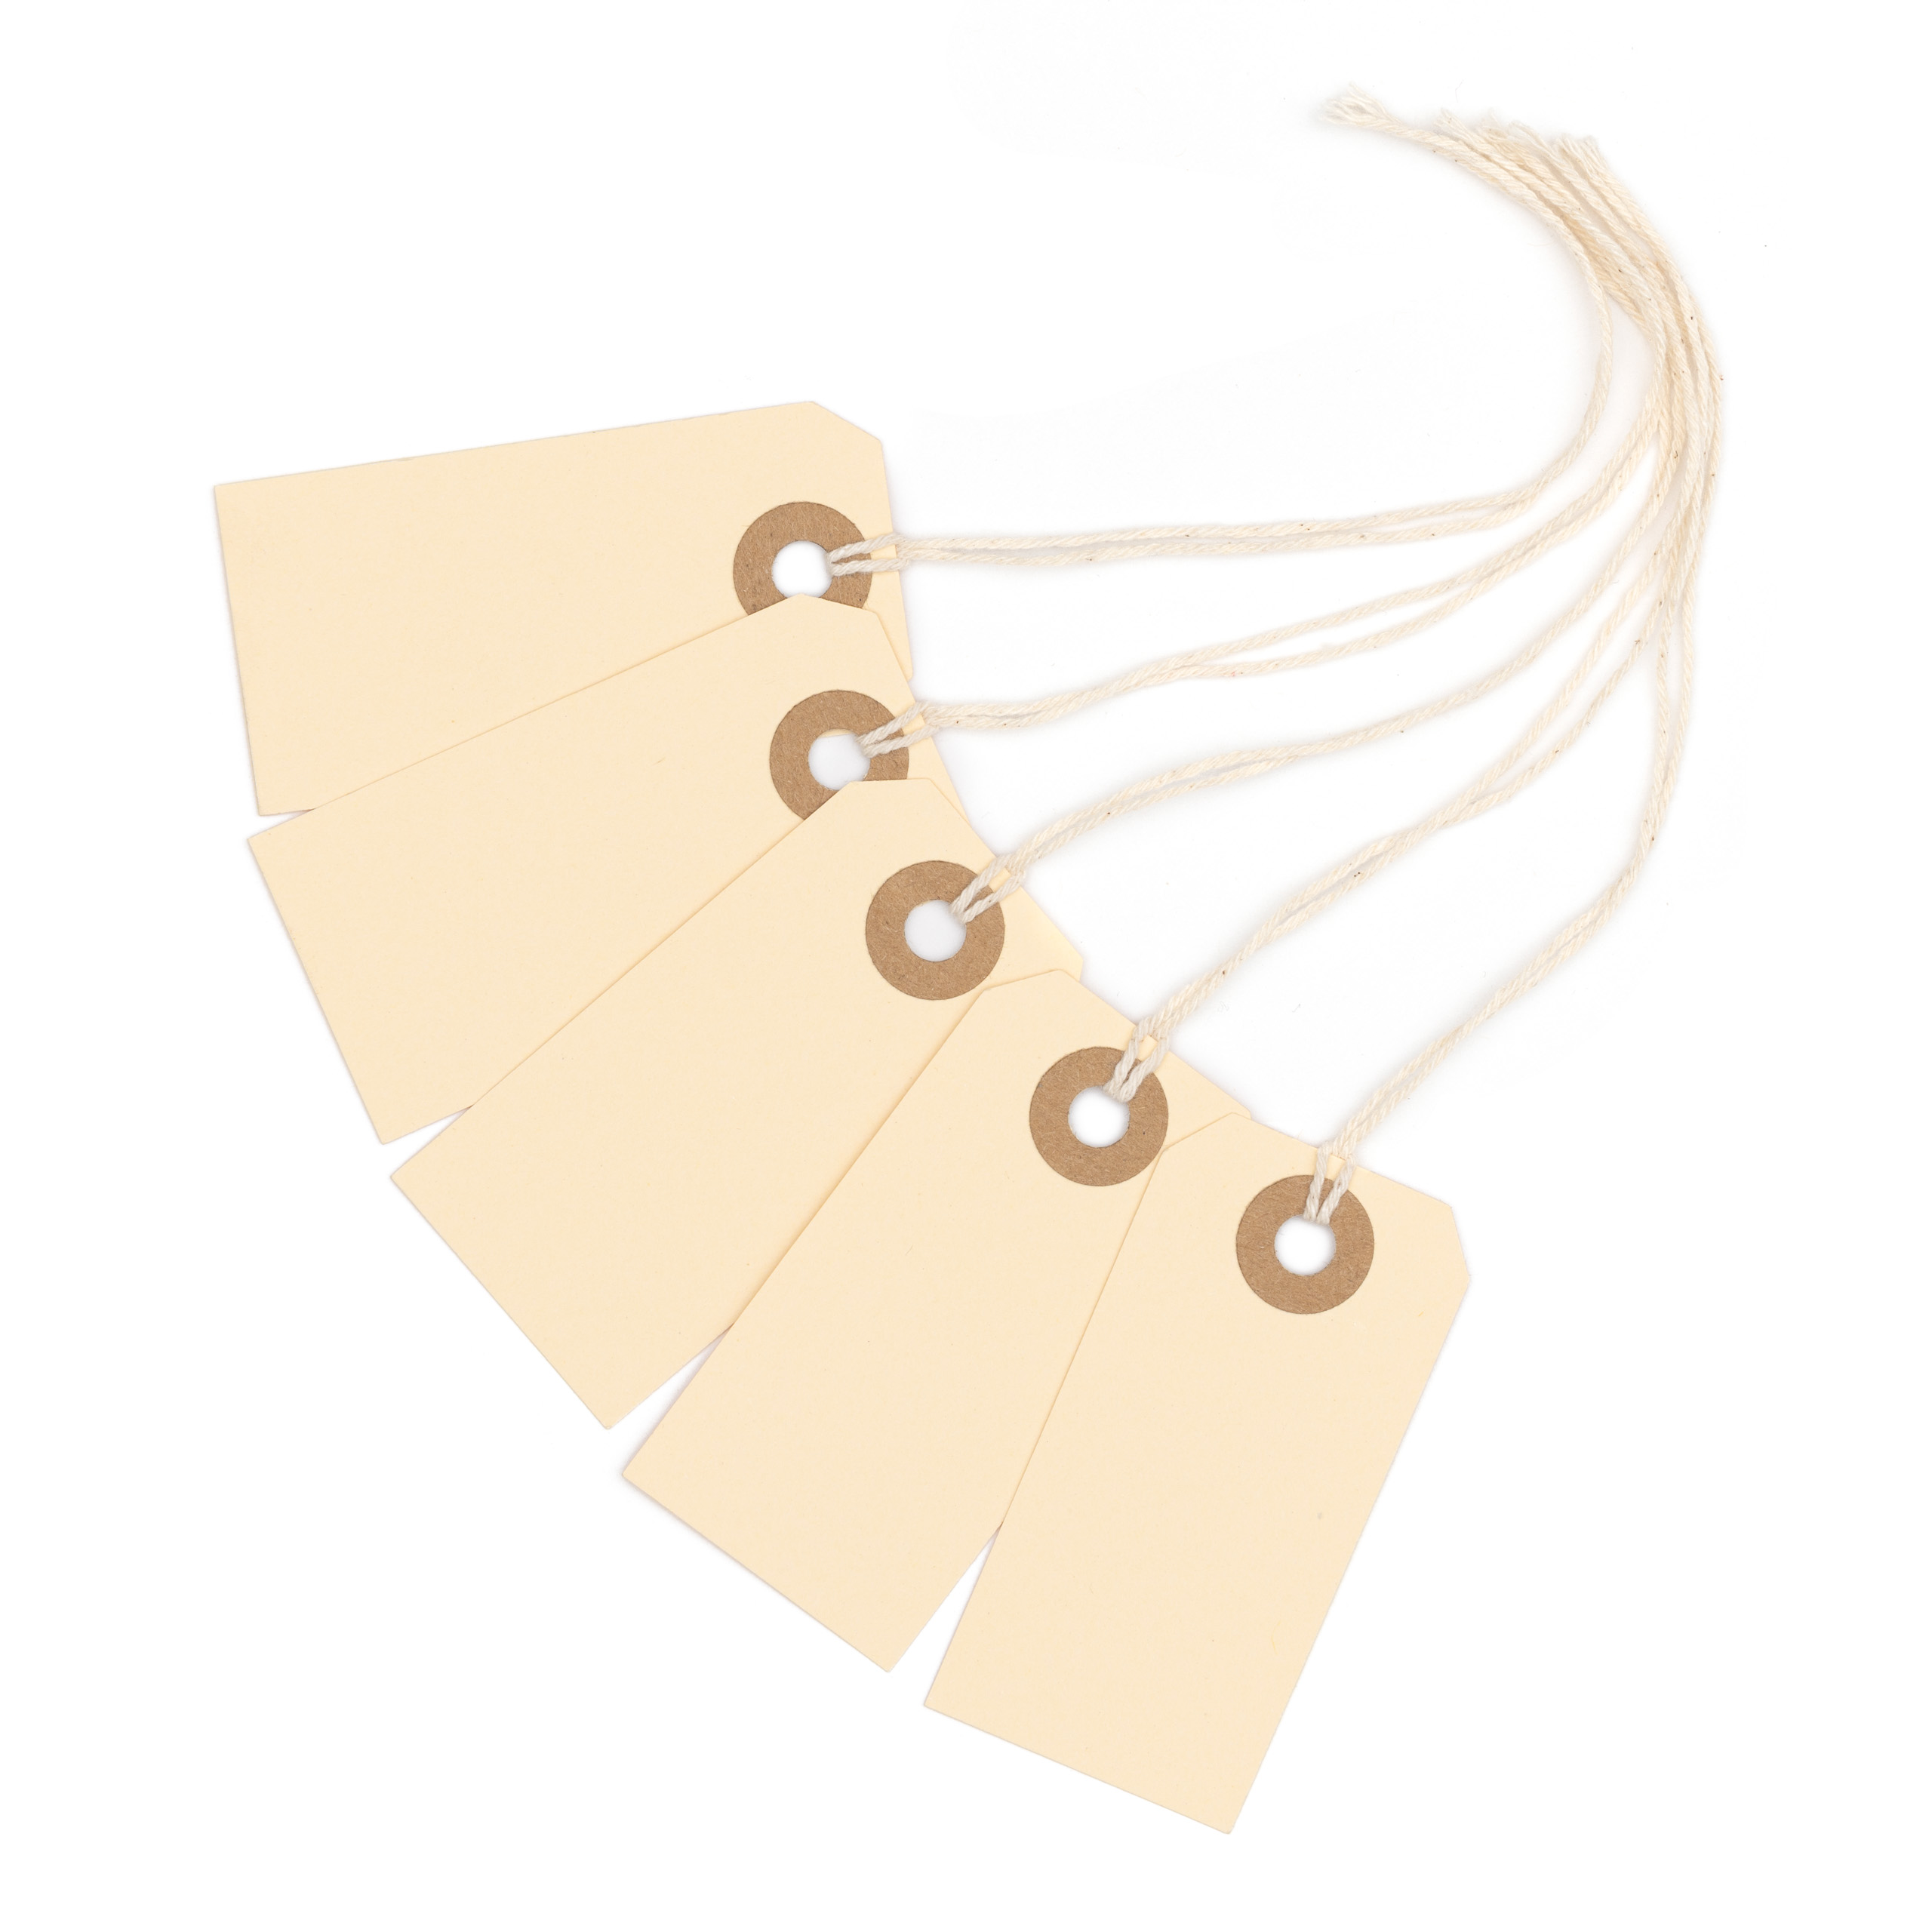  4 3/4-in x 2 3/8-in Manila Tags Shipping Tags with String  Attached Inventory Tags Luggage Paper Tag Present Tags Cardboard Tags with  String Hang Label Tags (Ivory, Solid Style) : Office Products